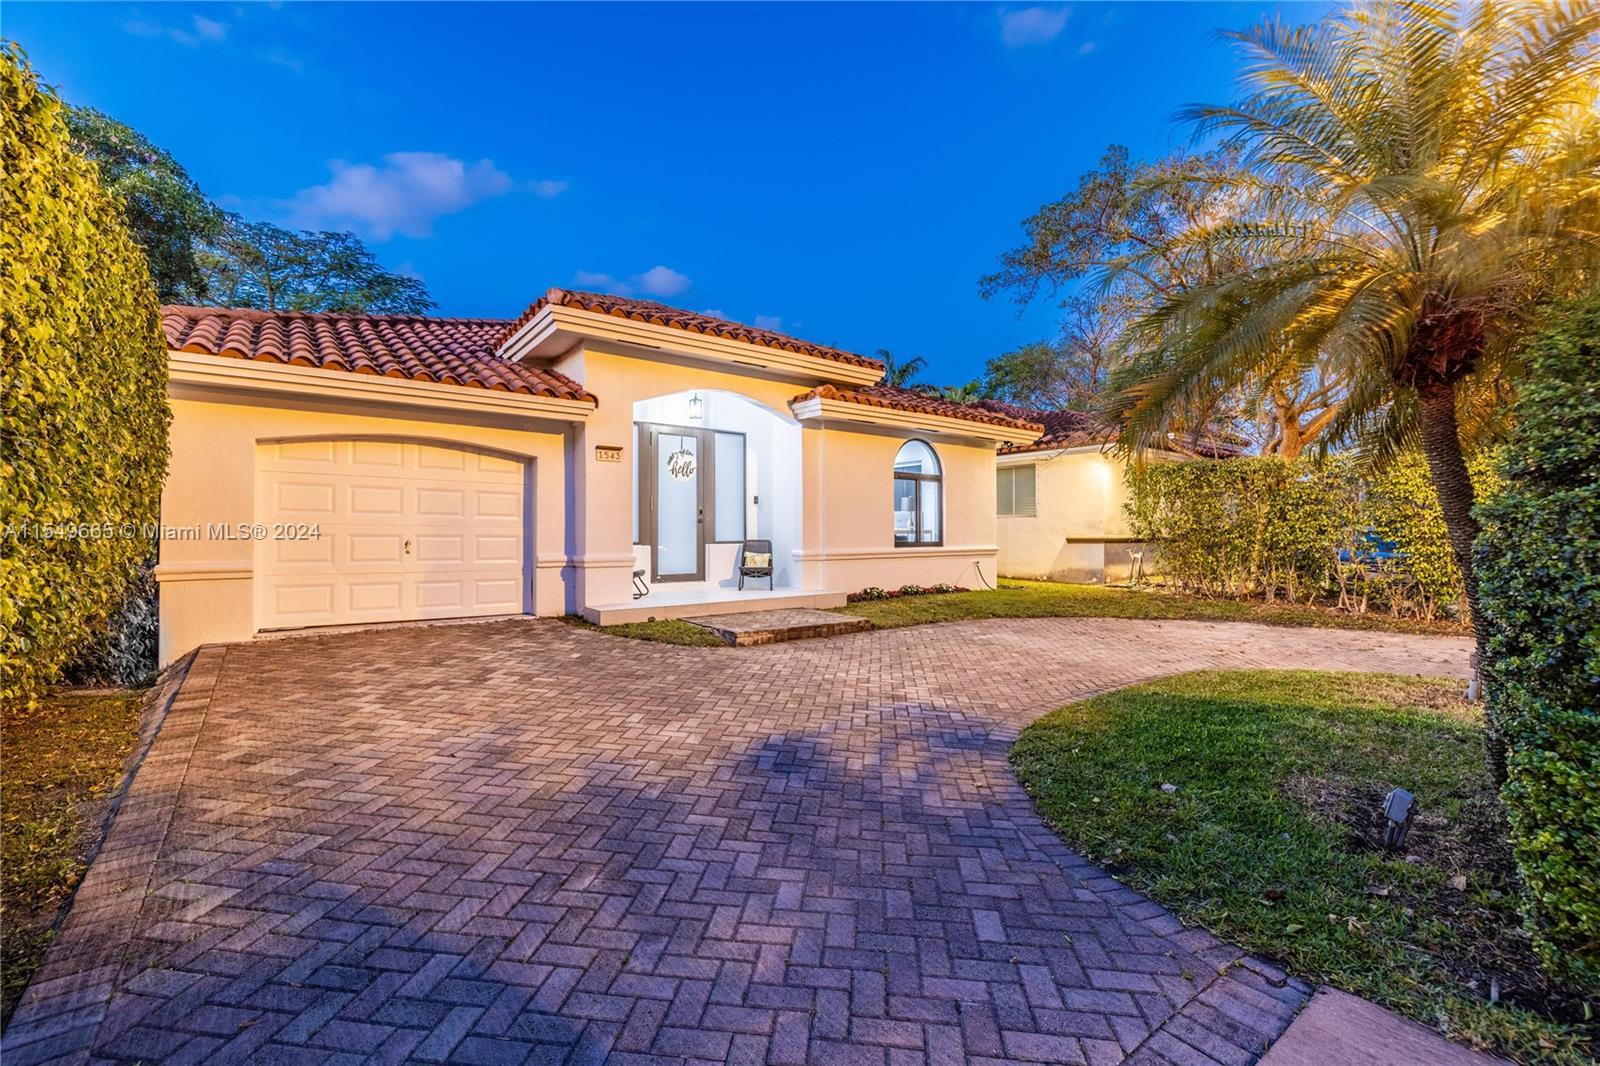 Photo of 1543 Bird Rd in Coral Gables, FL